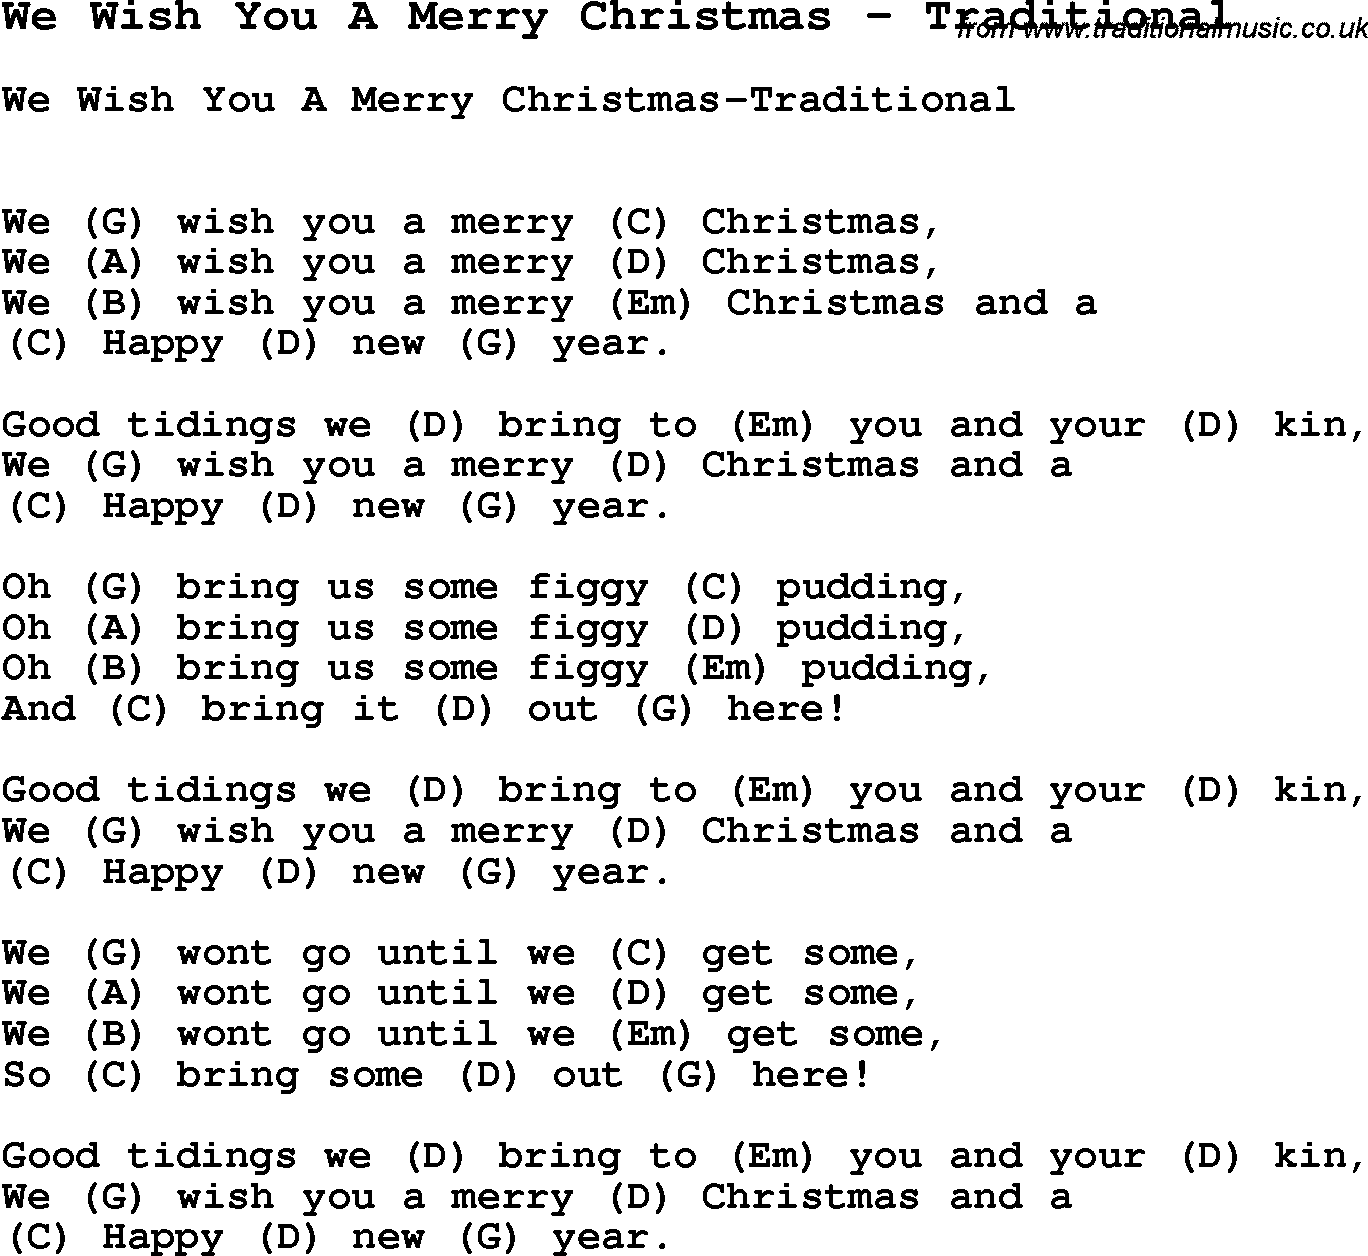 blødende Tilpasning svale Song We Wish You A Merry Christmas by Traditional, song lyric for vocal  performance plus accompaniment chords for Ukulele, Guitar, Banjo etc.